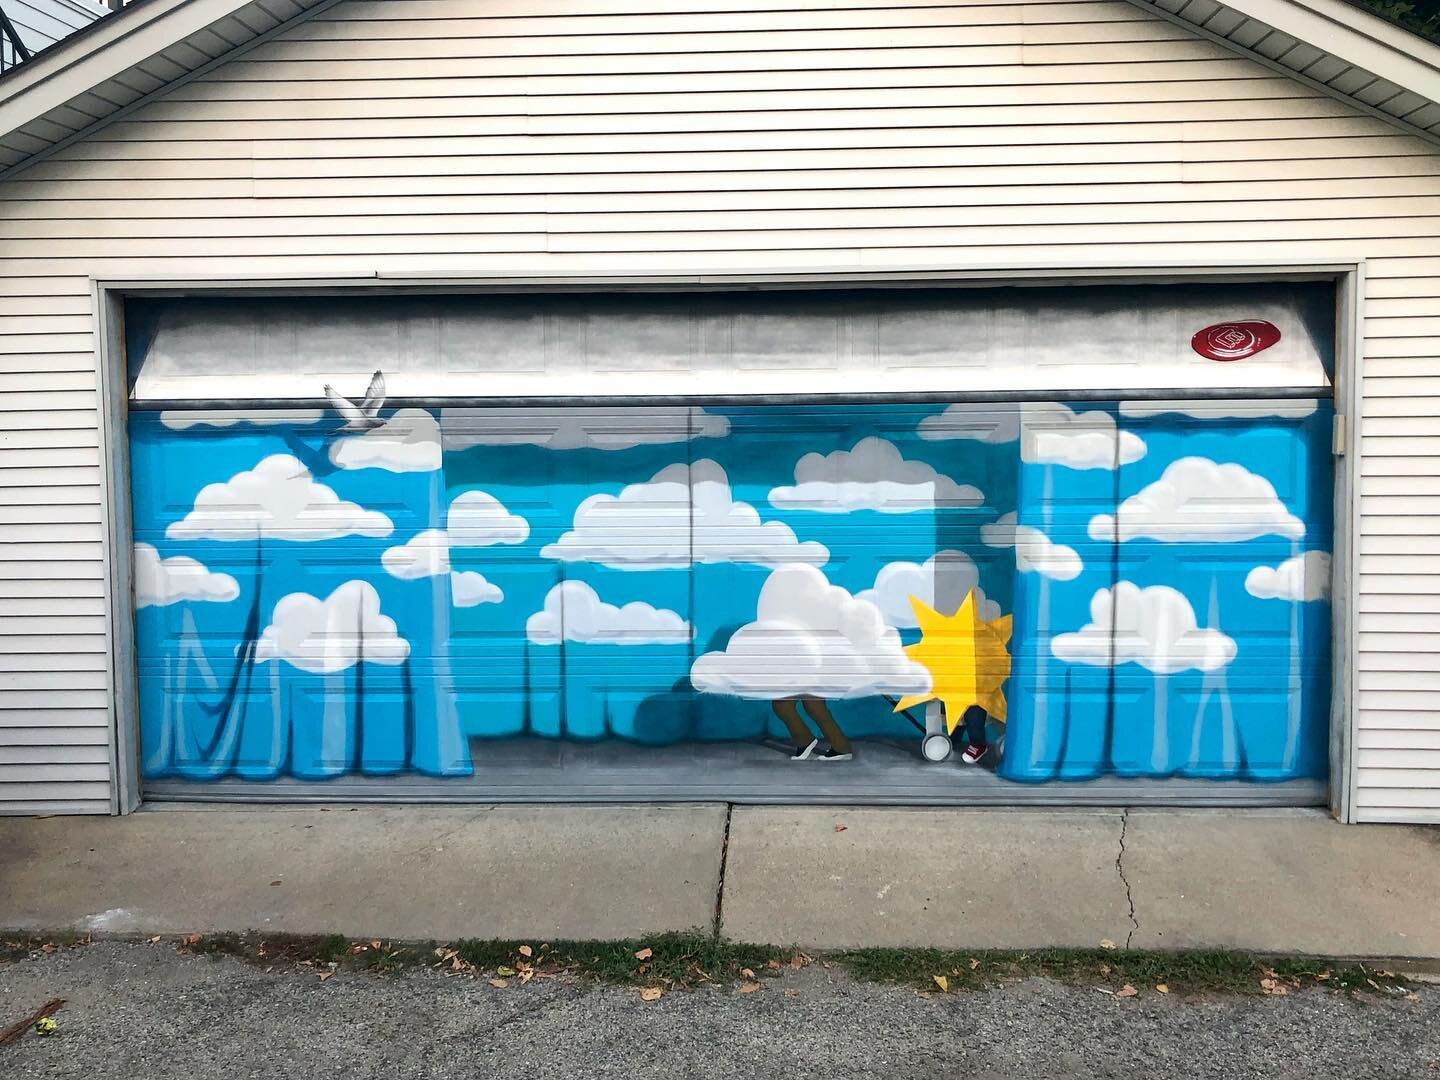 &ldquo;Here Comes the Sun&rdquo;&hellip;
A recent Chicago commission for a family with two little boys 🌤

 #WorksByELEE #chicagostreetart #streetartchicago #streetart #urbanart #sprayart #popart #mural #publicart #chicago #art #minimalism #bluesky #